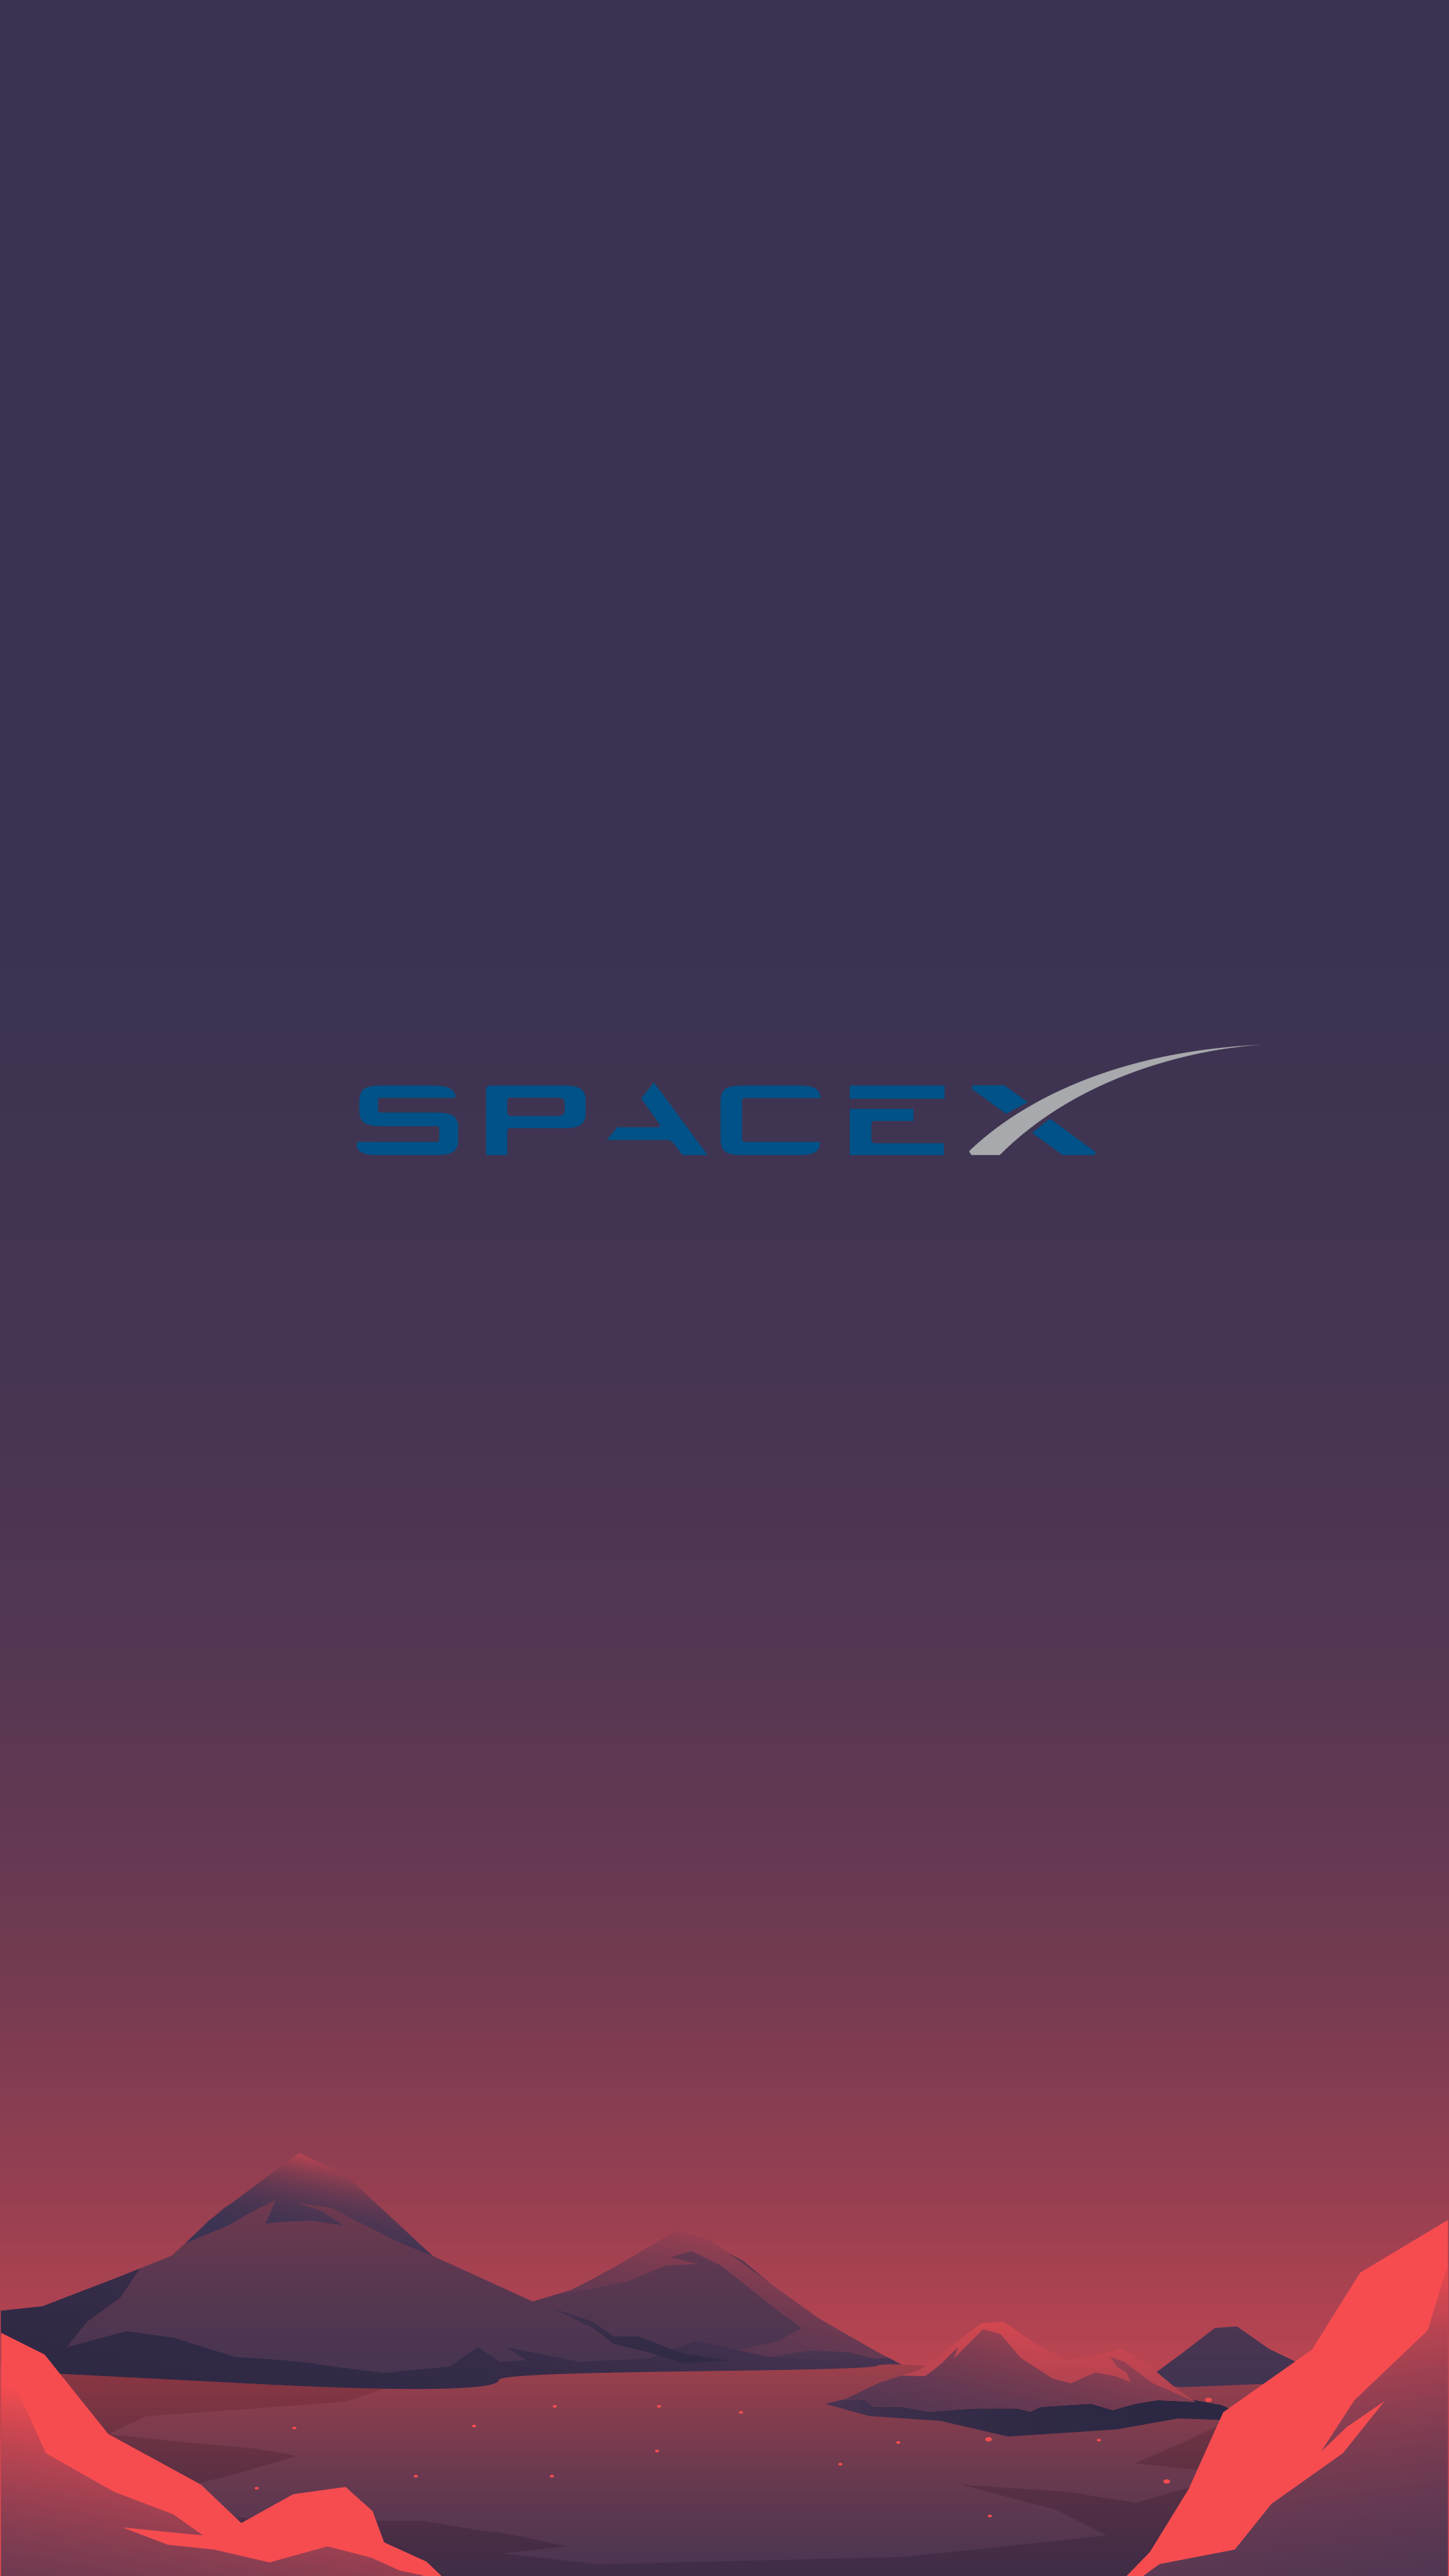 MARS NASA SPACEX WALLPAPERS 4K FOR MOBILE PHONE